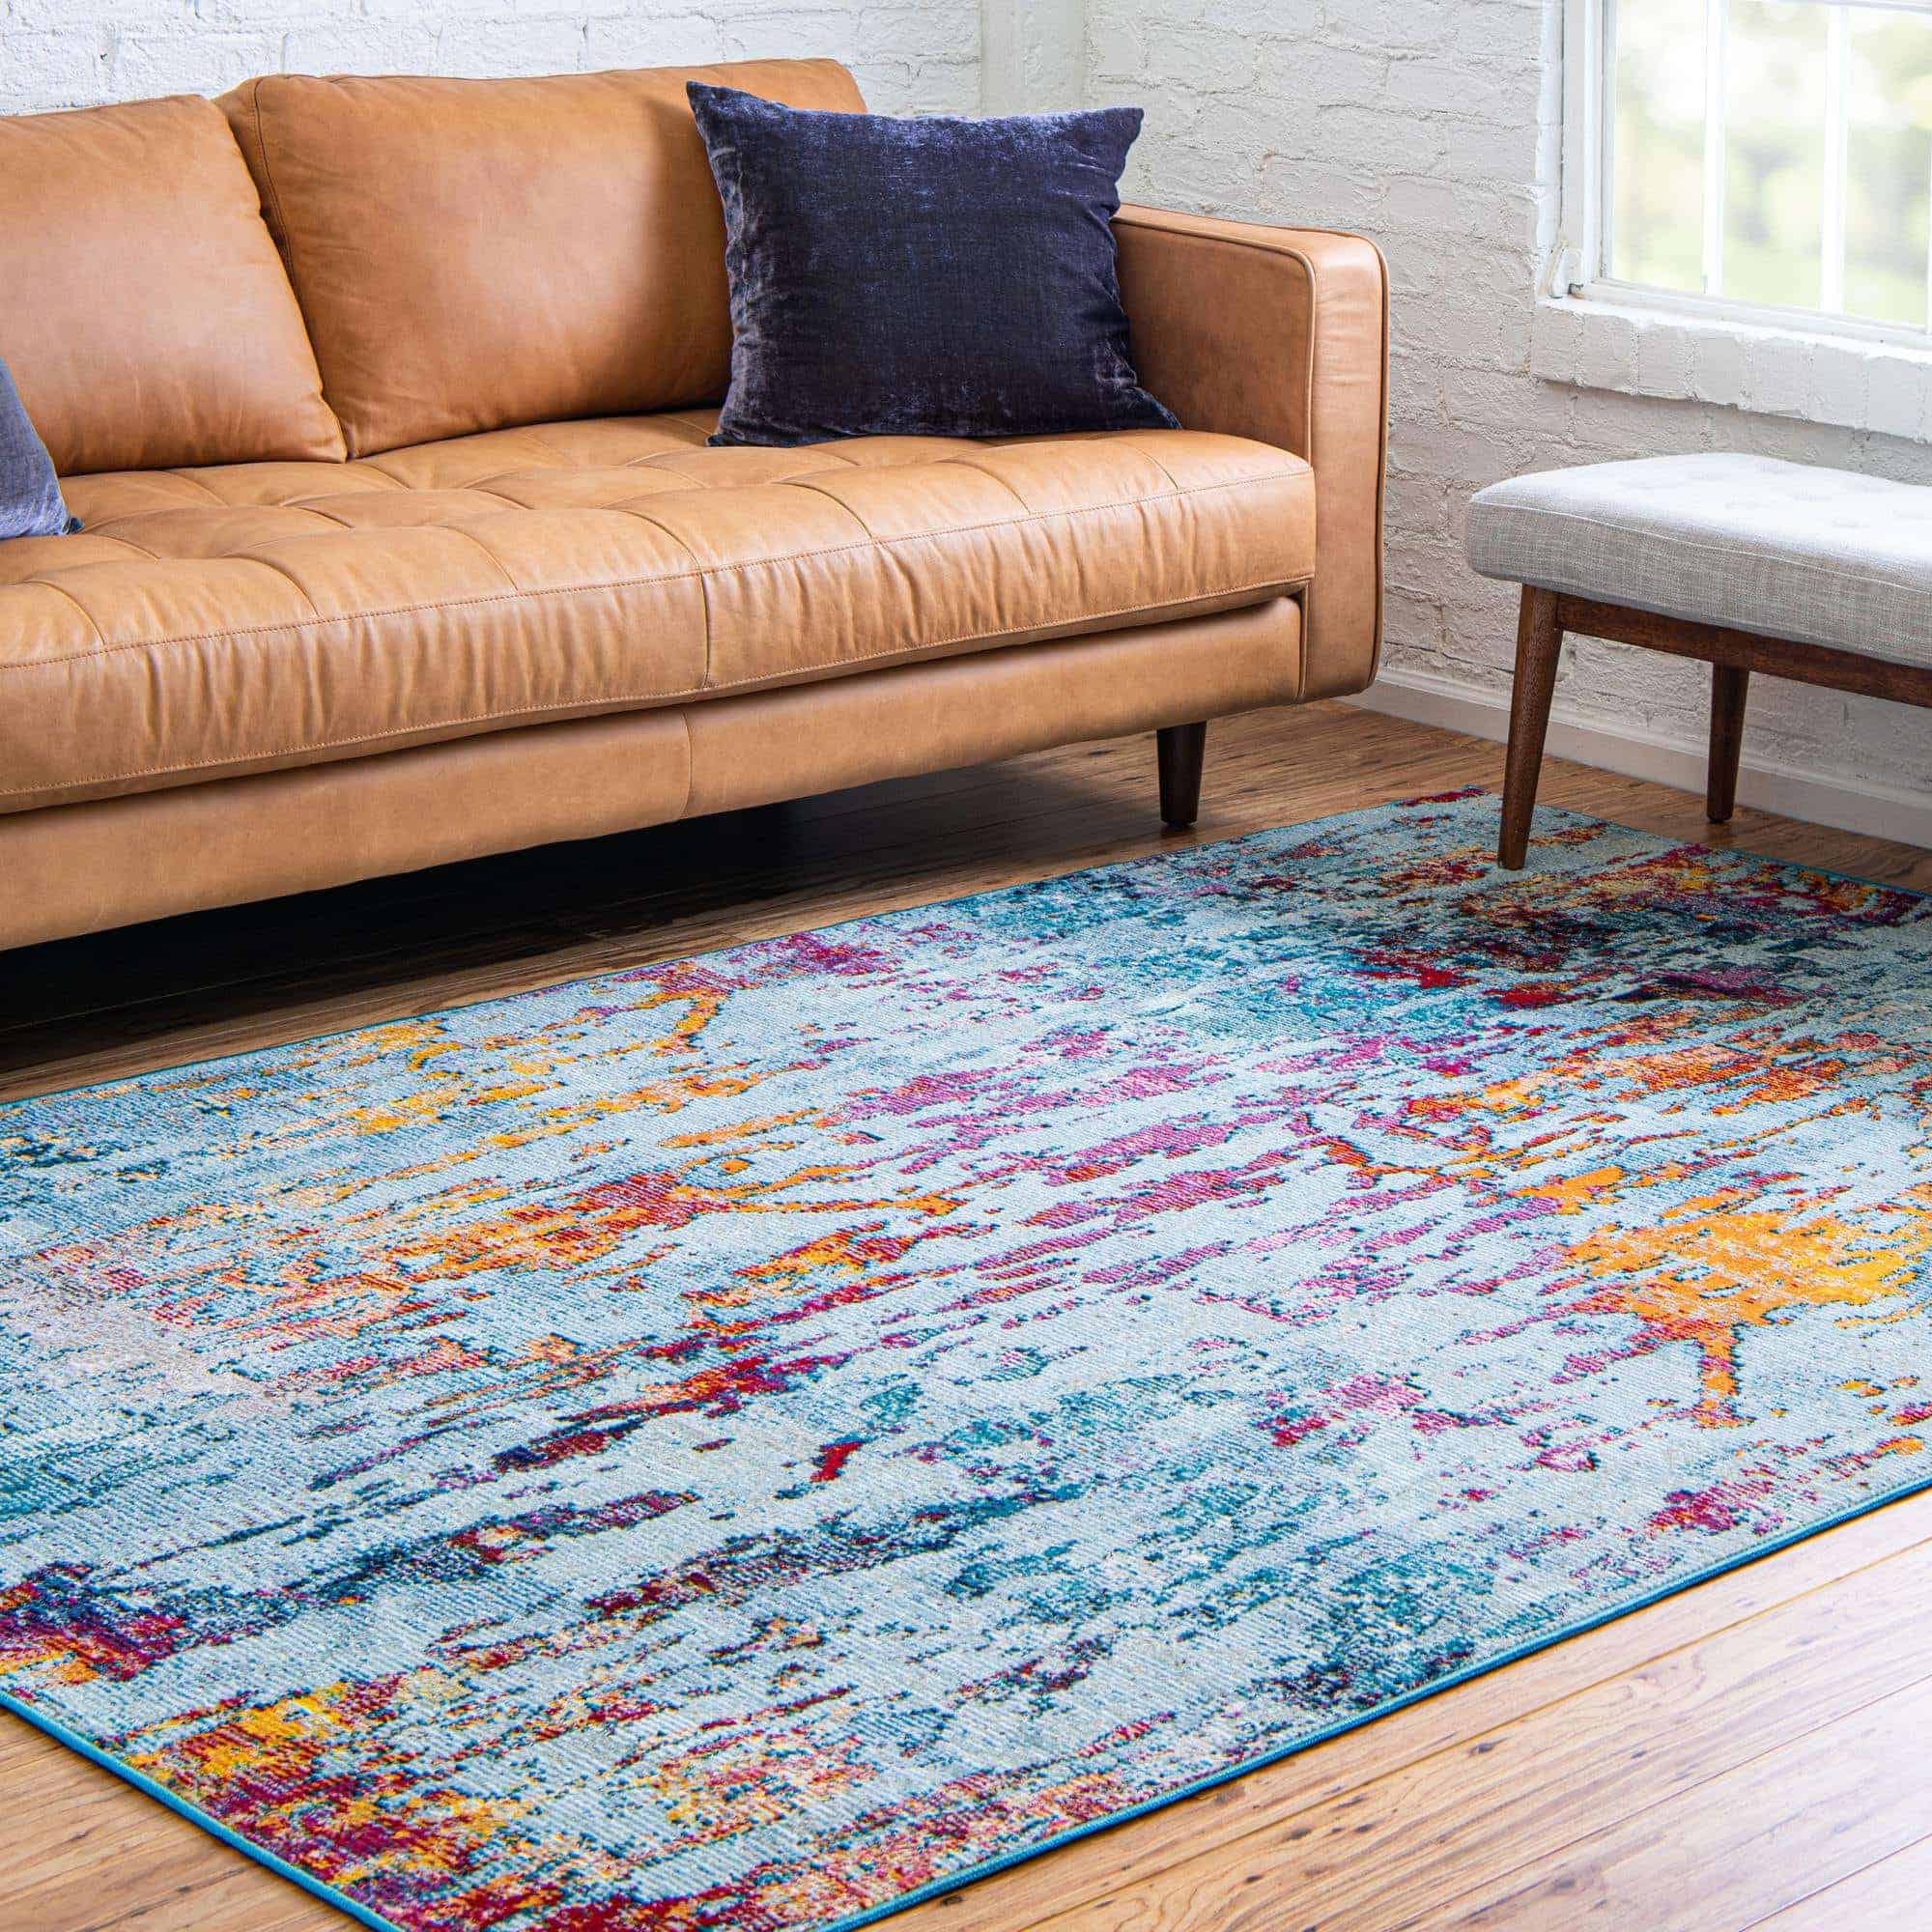 21 Stylish Rugs That Go With Brown Couches, Rugs That Go With Brown Leather Couch